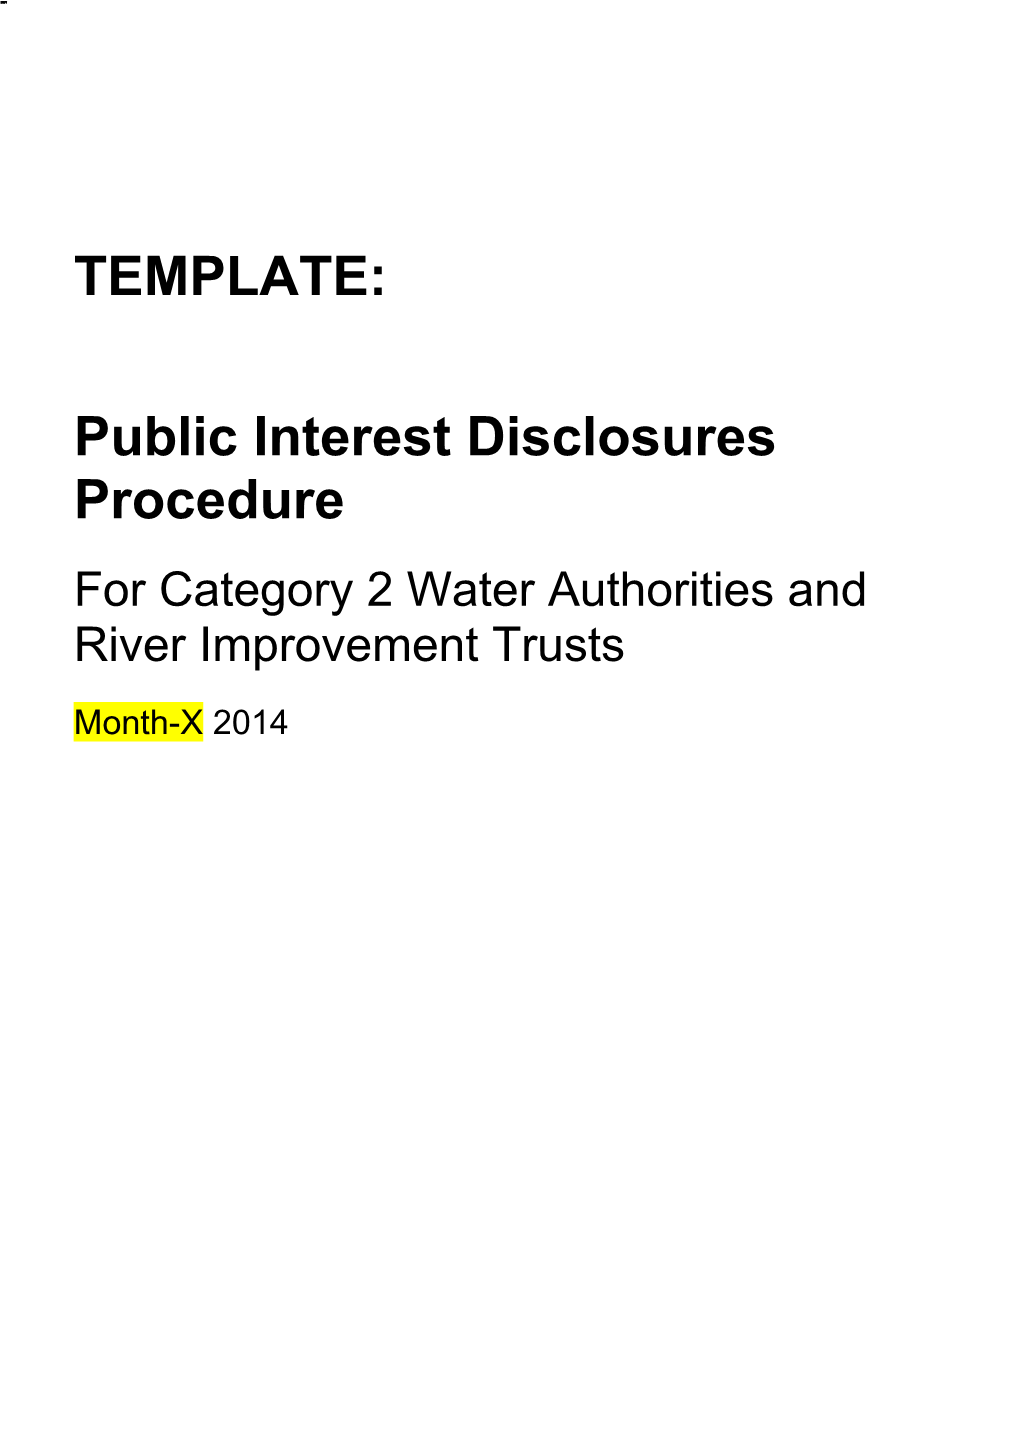 Template Policy and Procedure for Managing Public Interest Disclosures